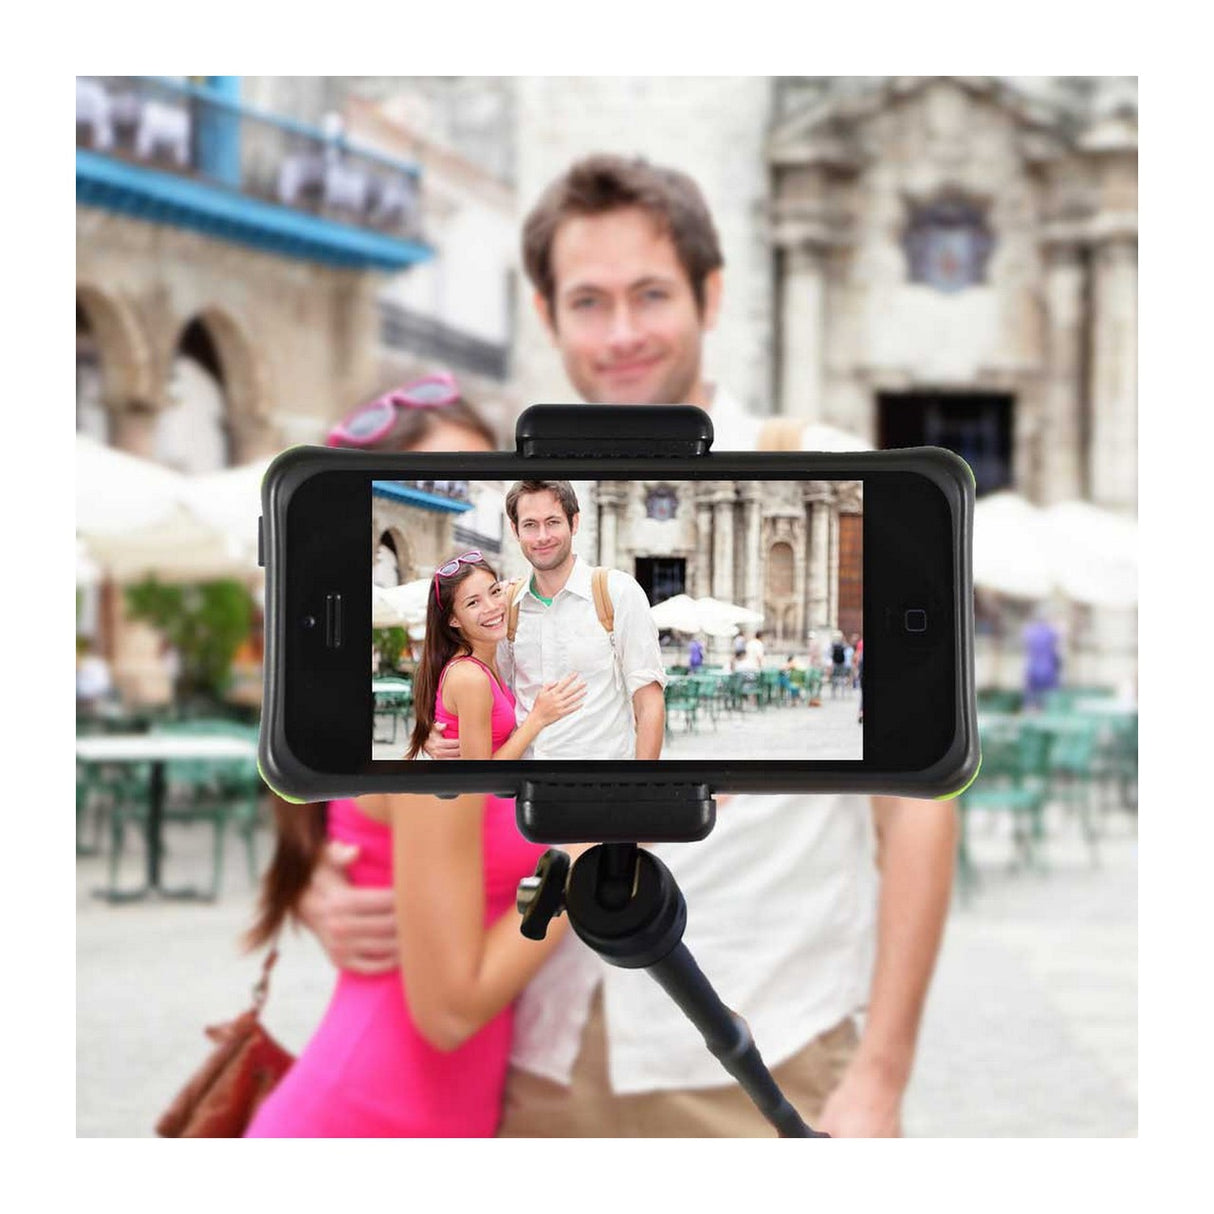 iStabilizer Monopod | Smartphone Mount Selfie Stick for iPhone 4 4S 5 5C 5S 6 6 Plus 6S 6S Plus Galaxy Note Galaxy S